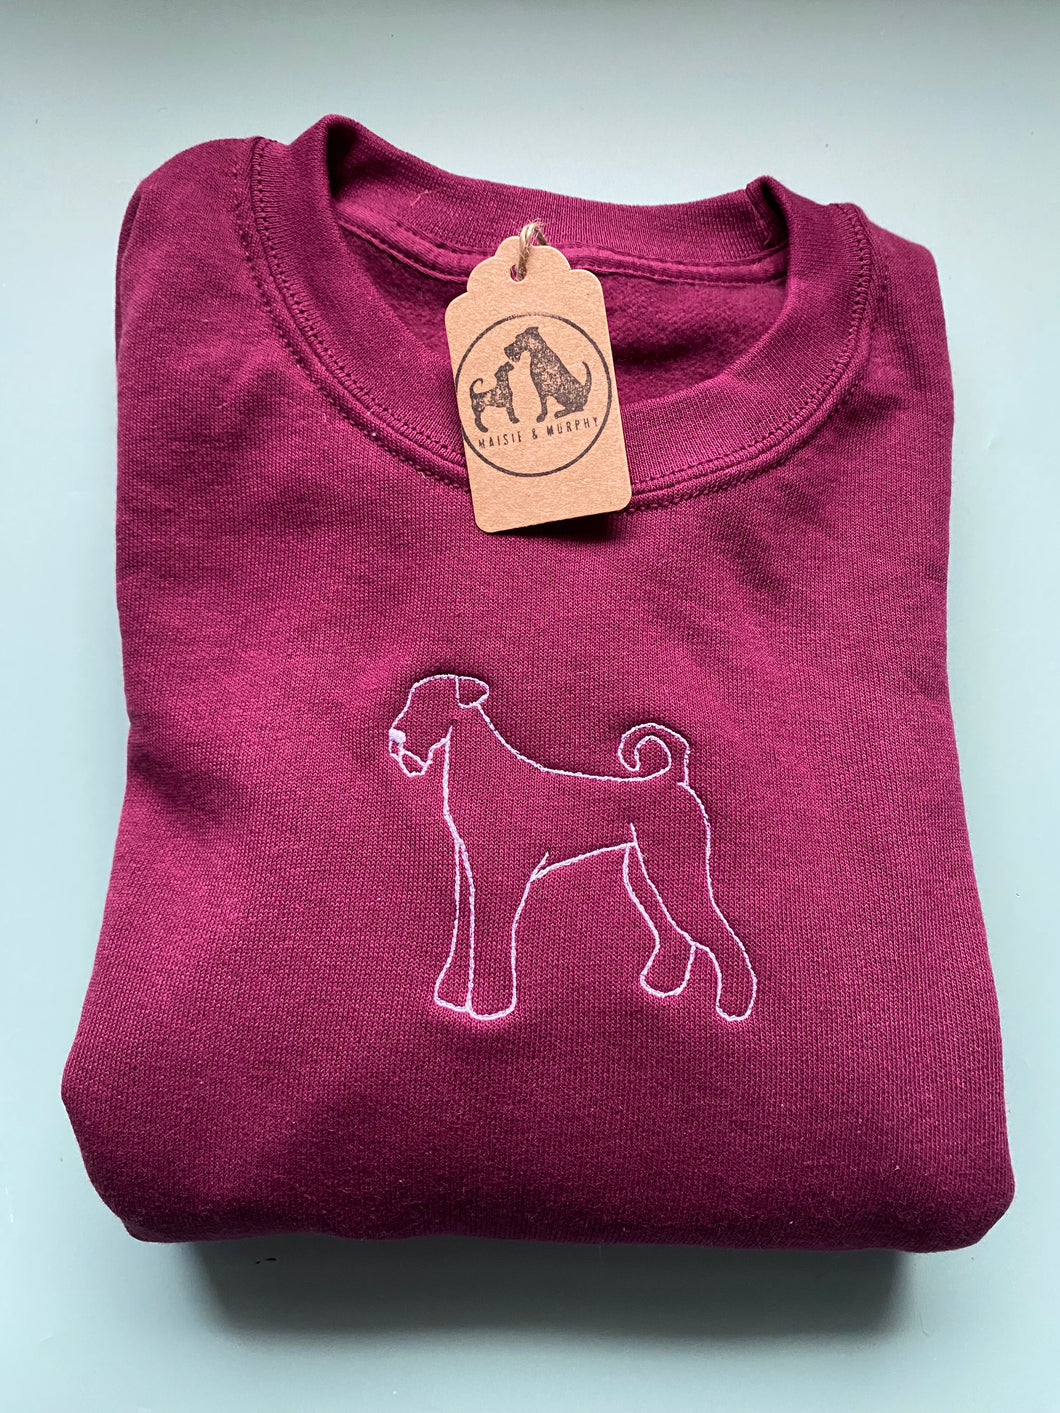 Embroidered Airedale Silhouette Sweatshirt- Gifts for Terrier lovers and owners